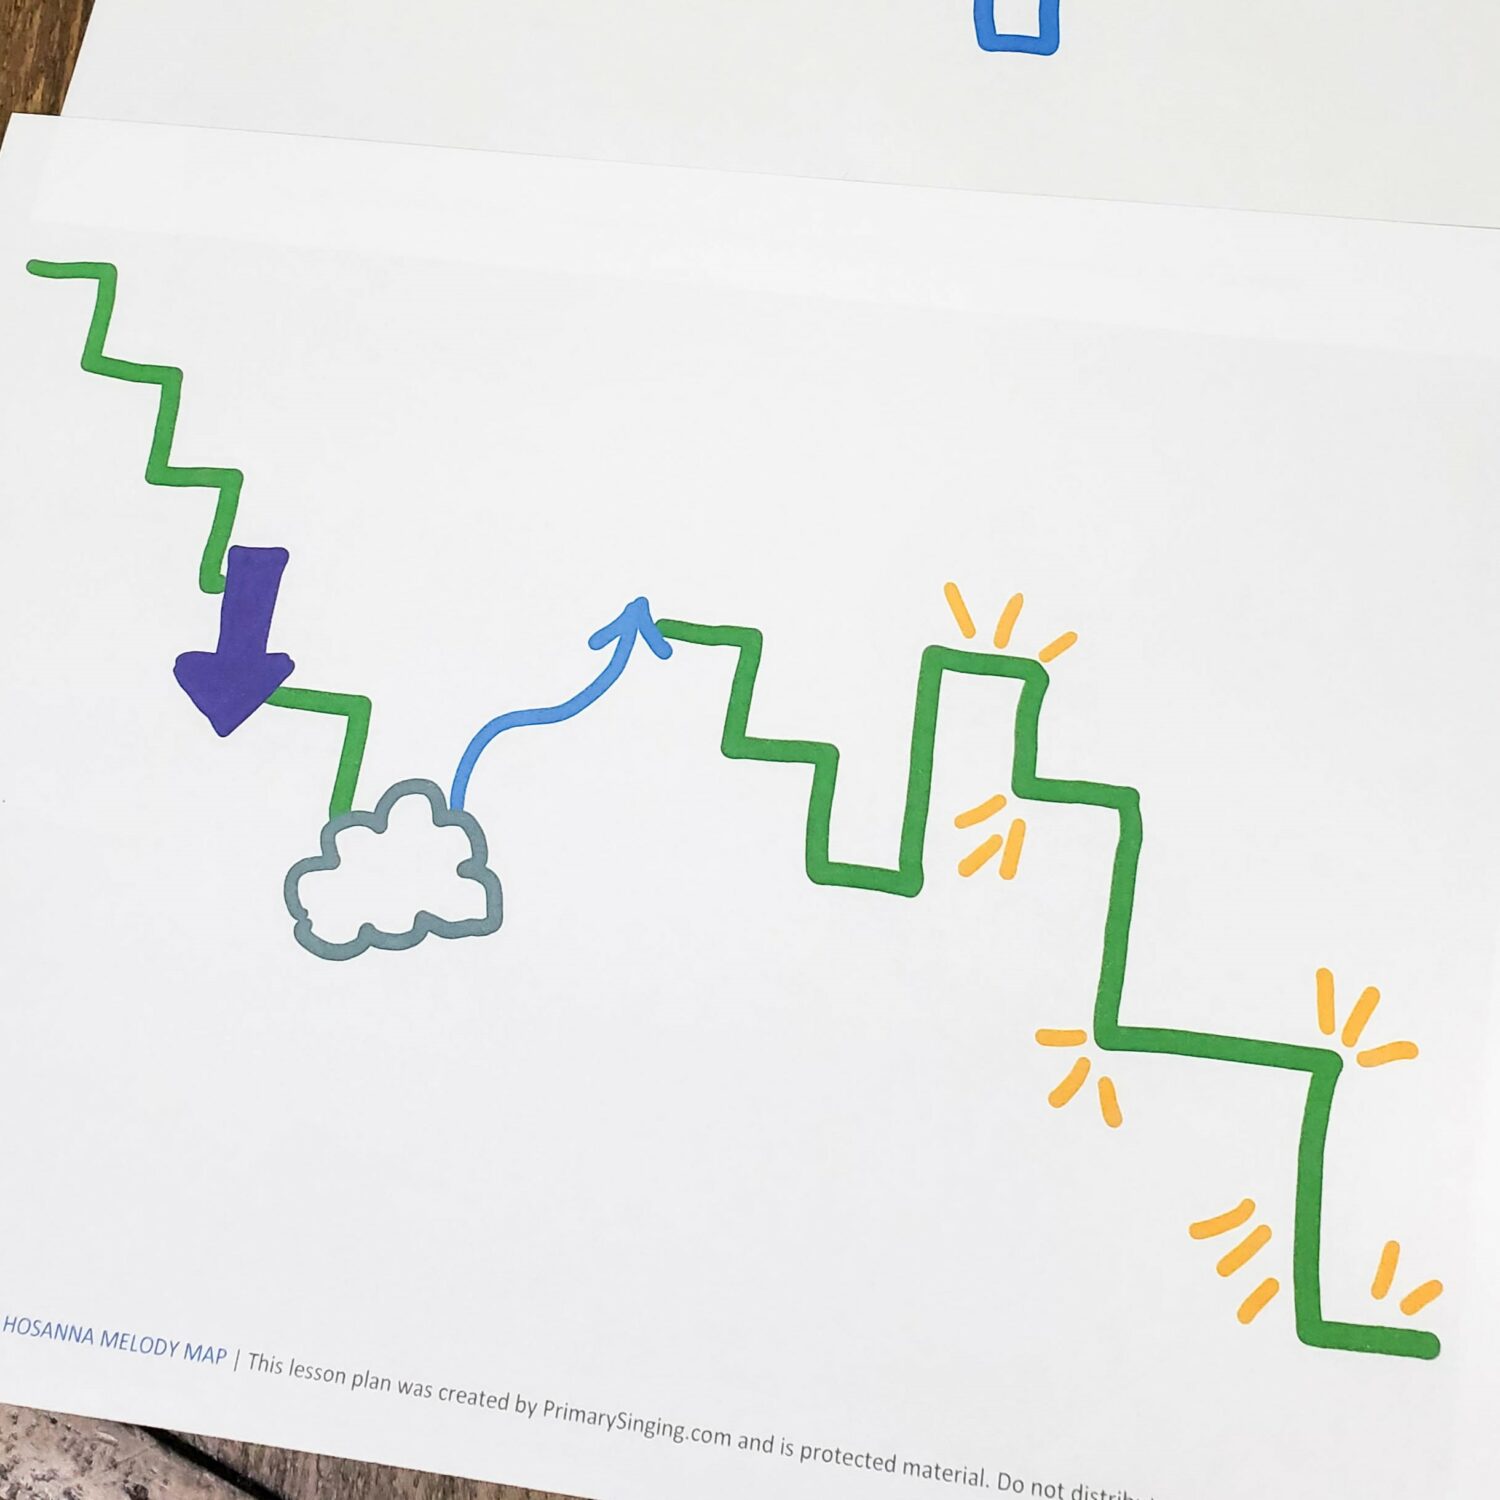 Easter Hosanna Melody Map singing time activity for a fun way to help you visually show the melody and have the children follow along with hand motions as they decode the melody map! Easter Hosanna singing time activity for LDS Primary music leaders.